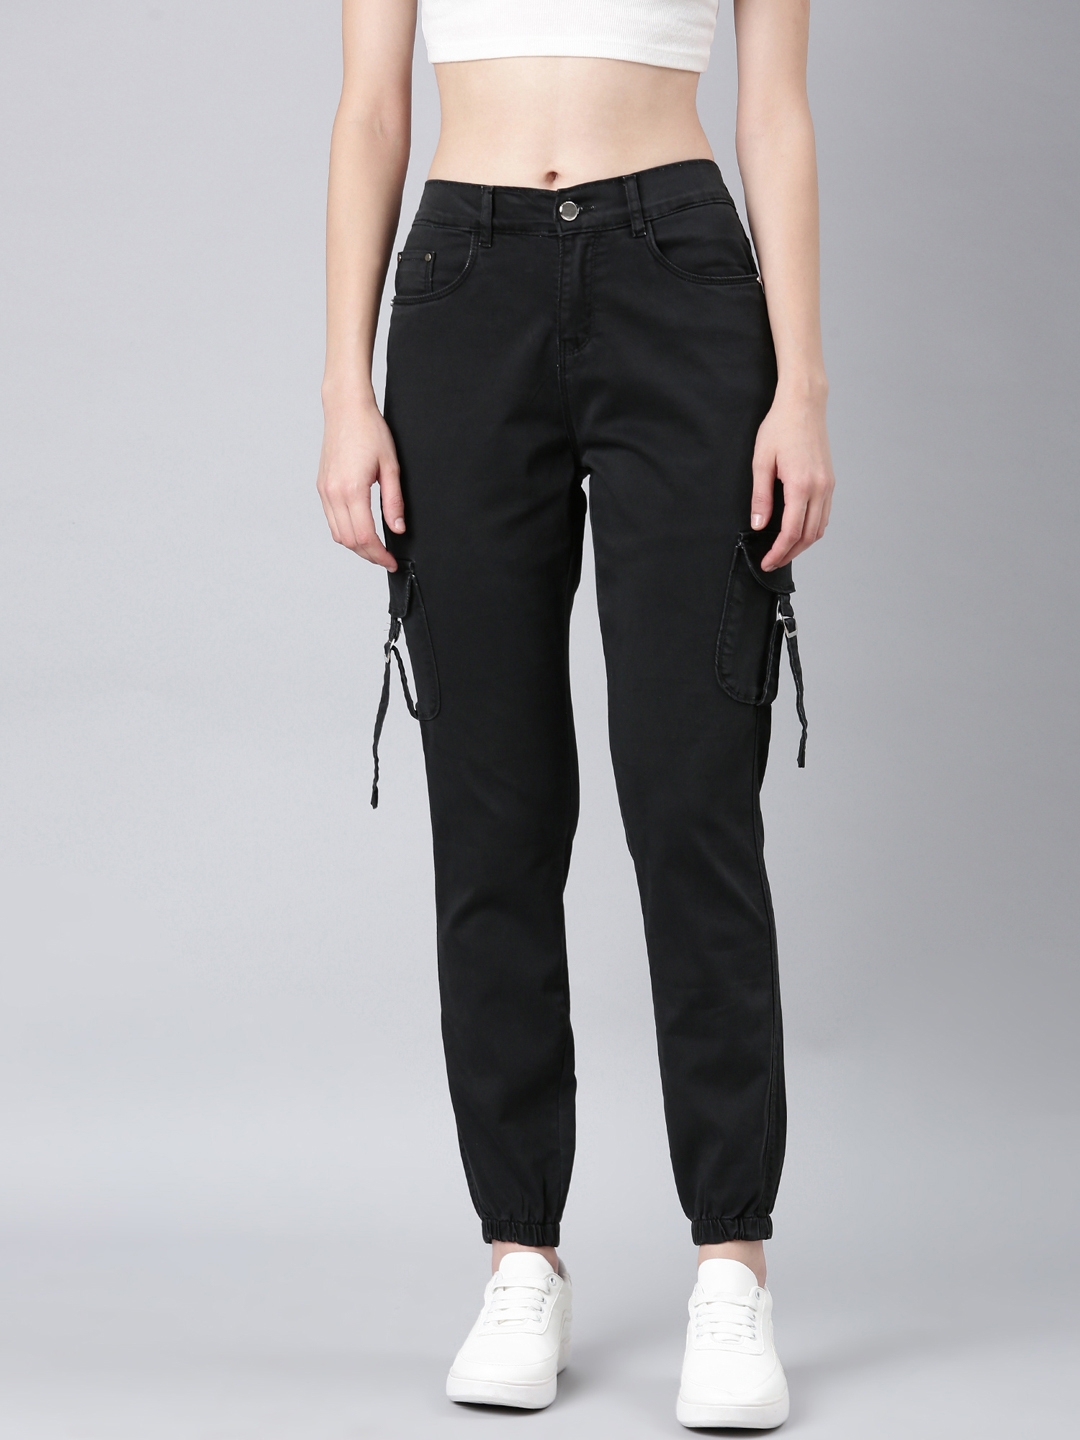 New Joggers Pants for Women